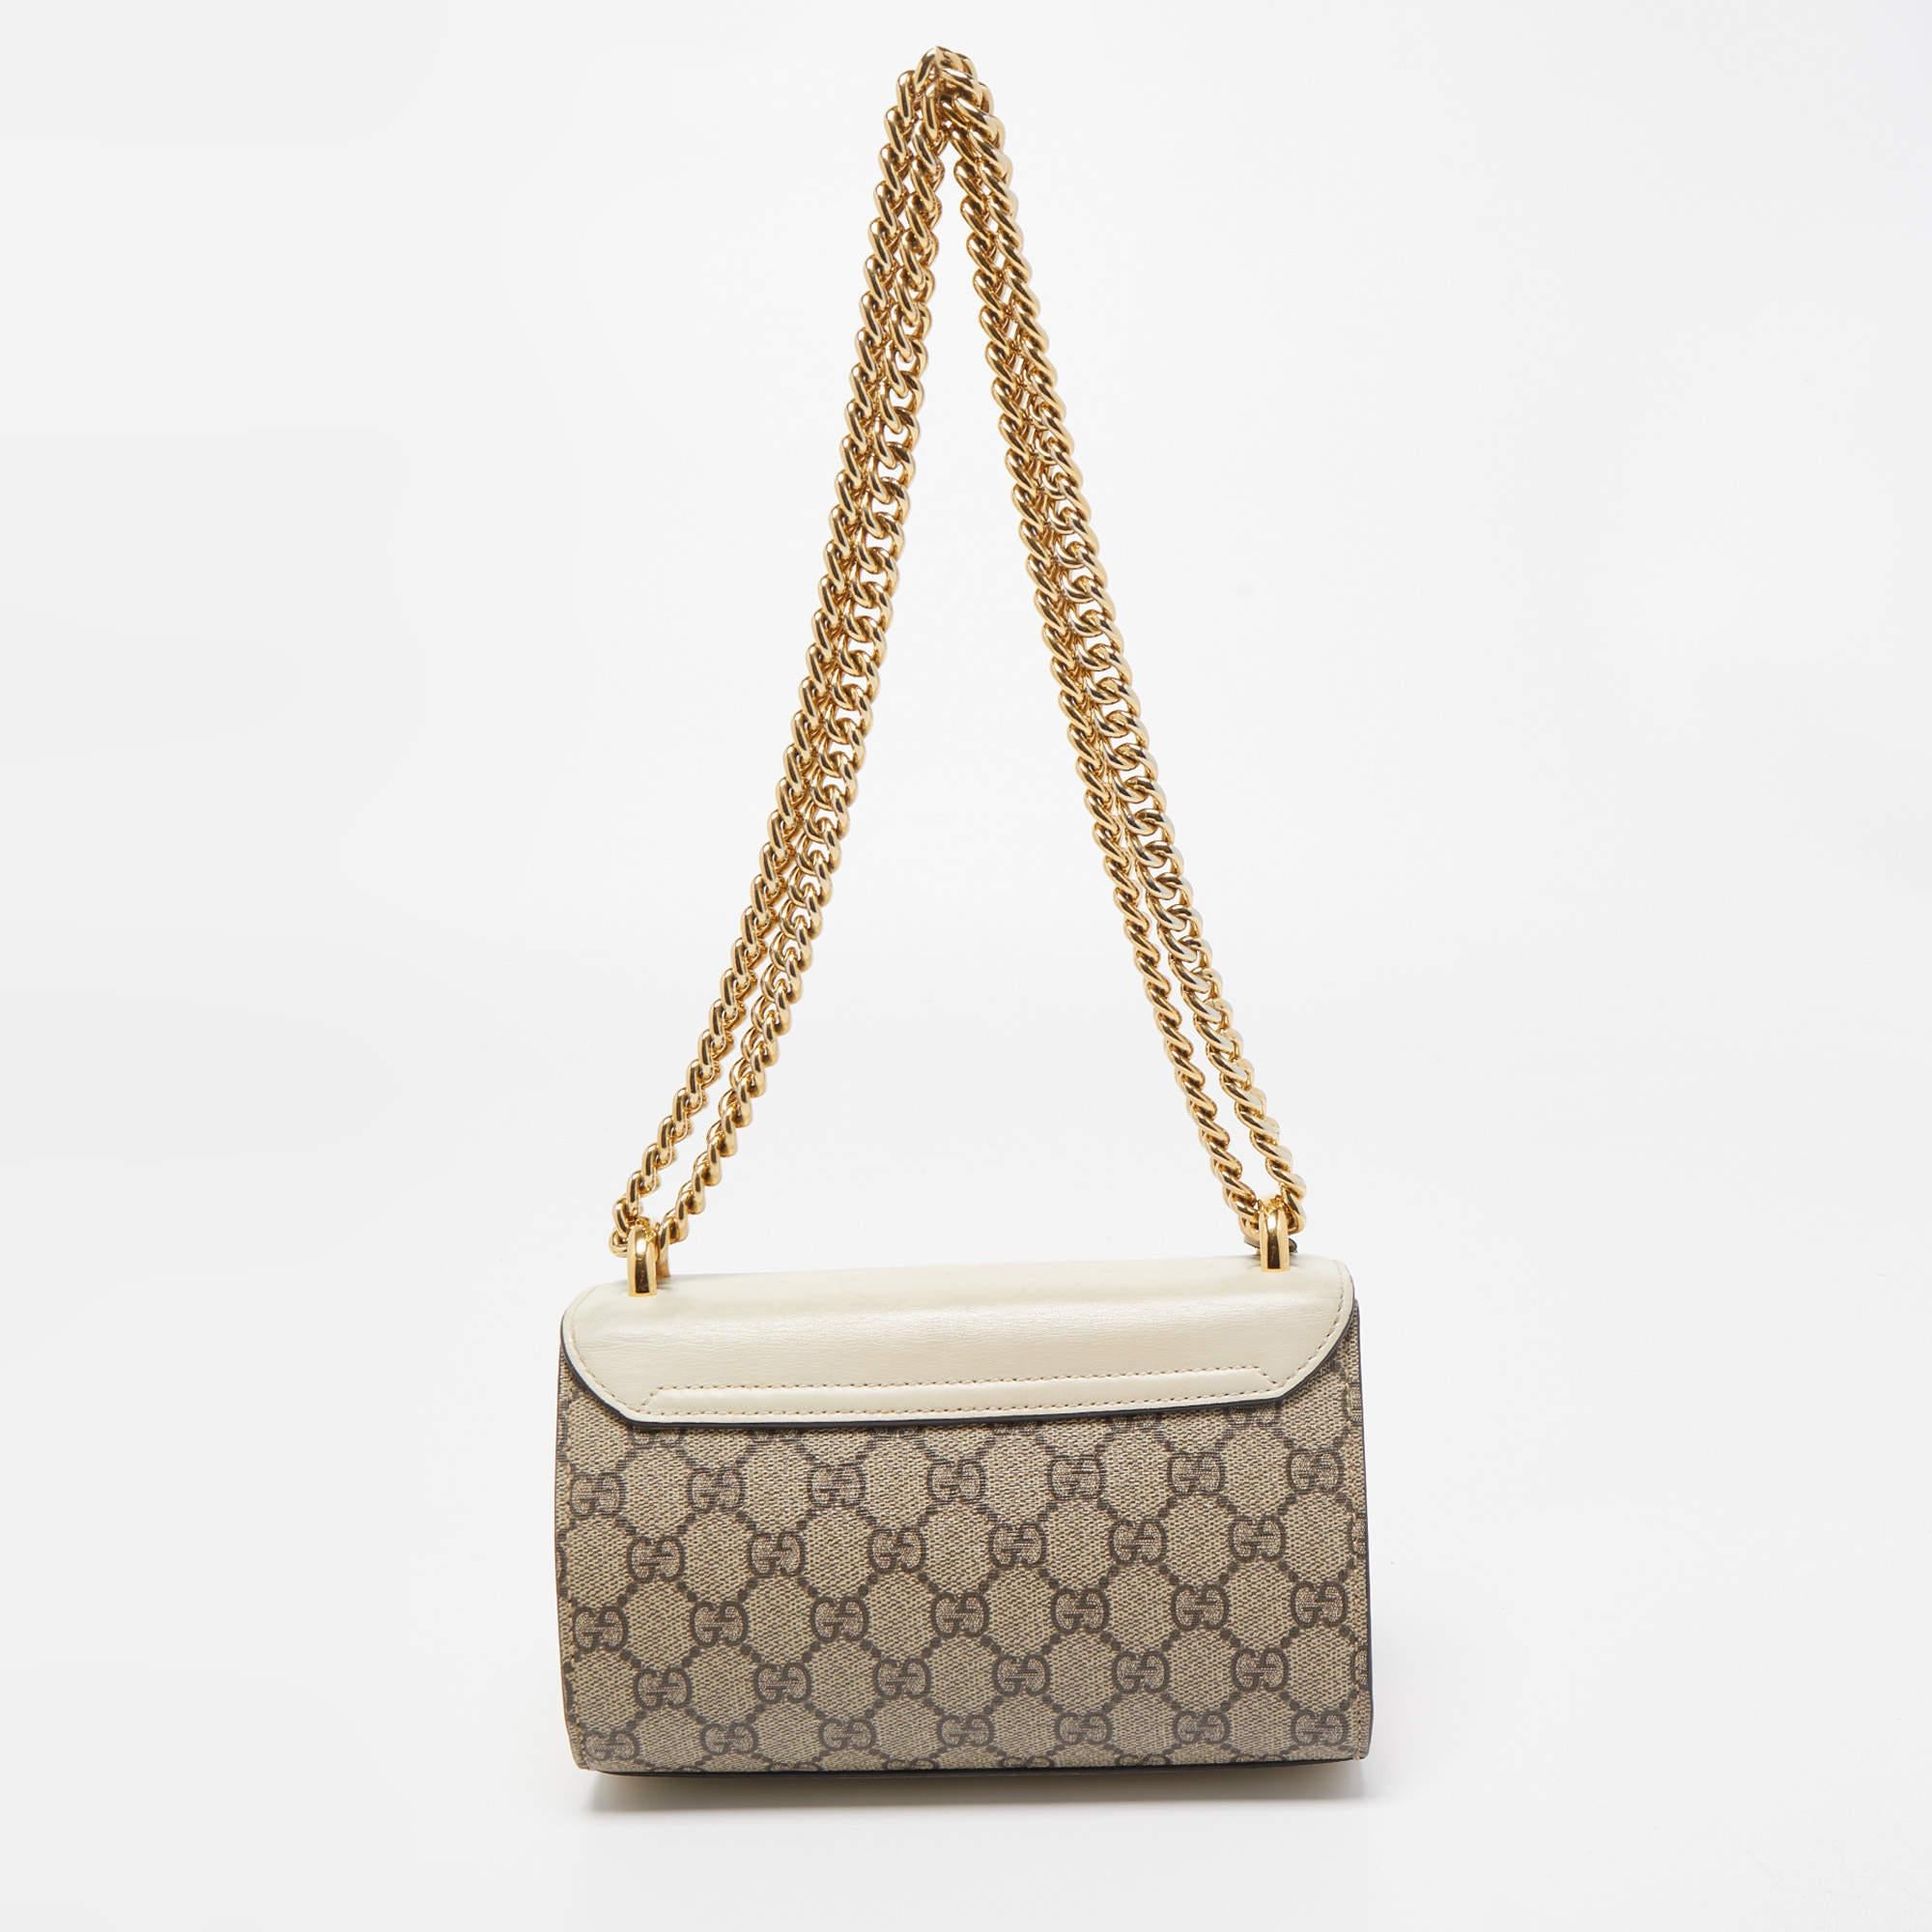 You'll surely fall in love with this spectacular shoulder bag from Gucci! The beige and off white bag is crafted from the signature GG Supreme canvas and leather into a structured silhouette. It flaunts a brand name engraved gold-tone padlock and